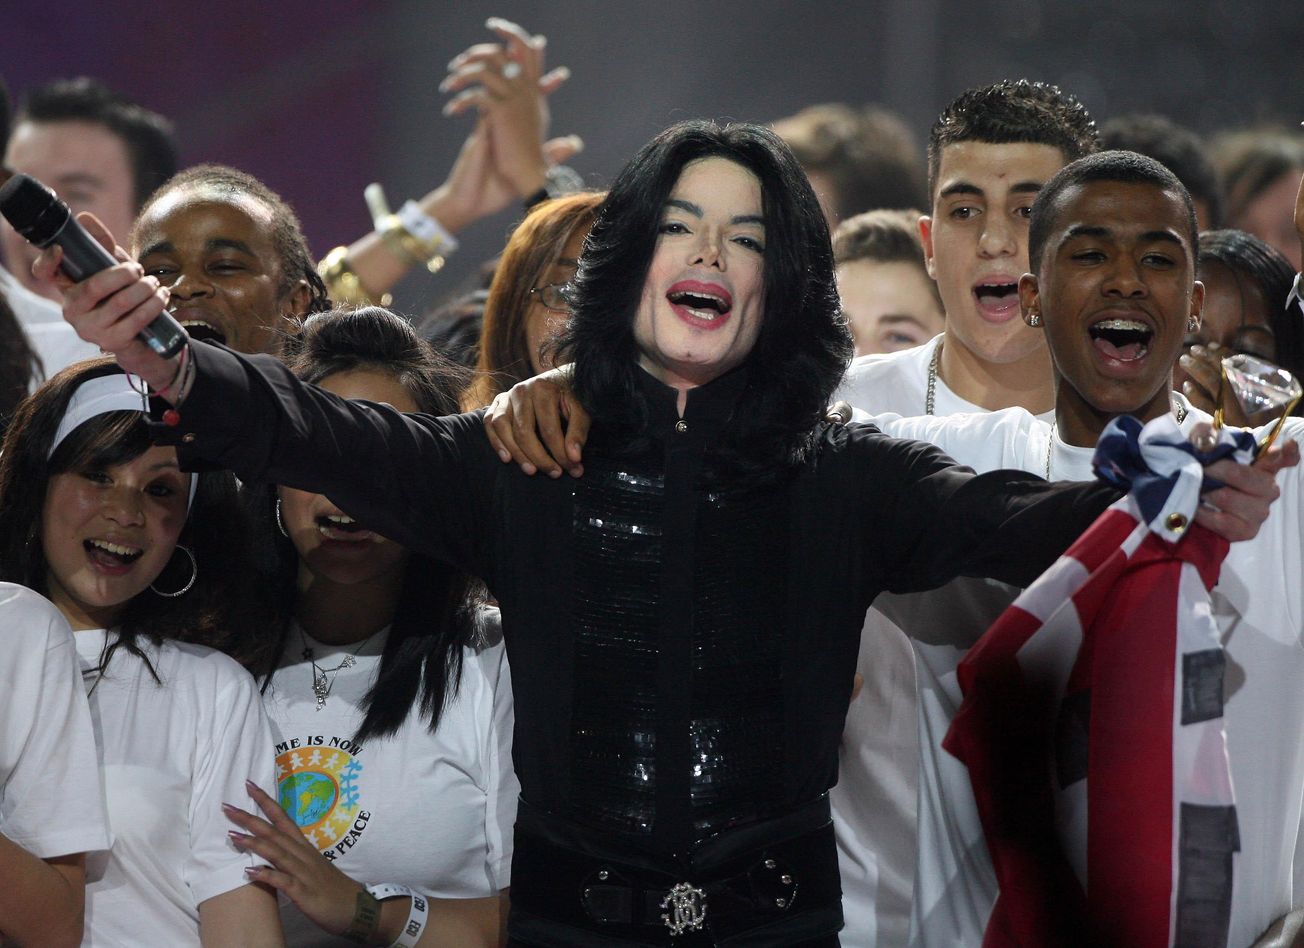 Michael Jackson musical slated for 2020 Broadway premiere